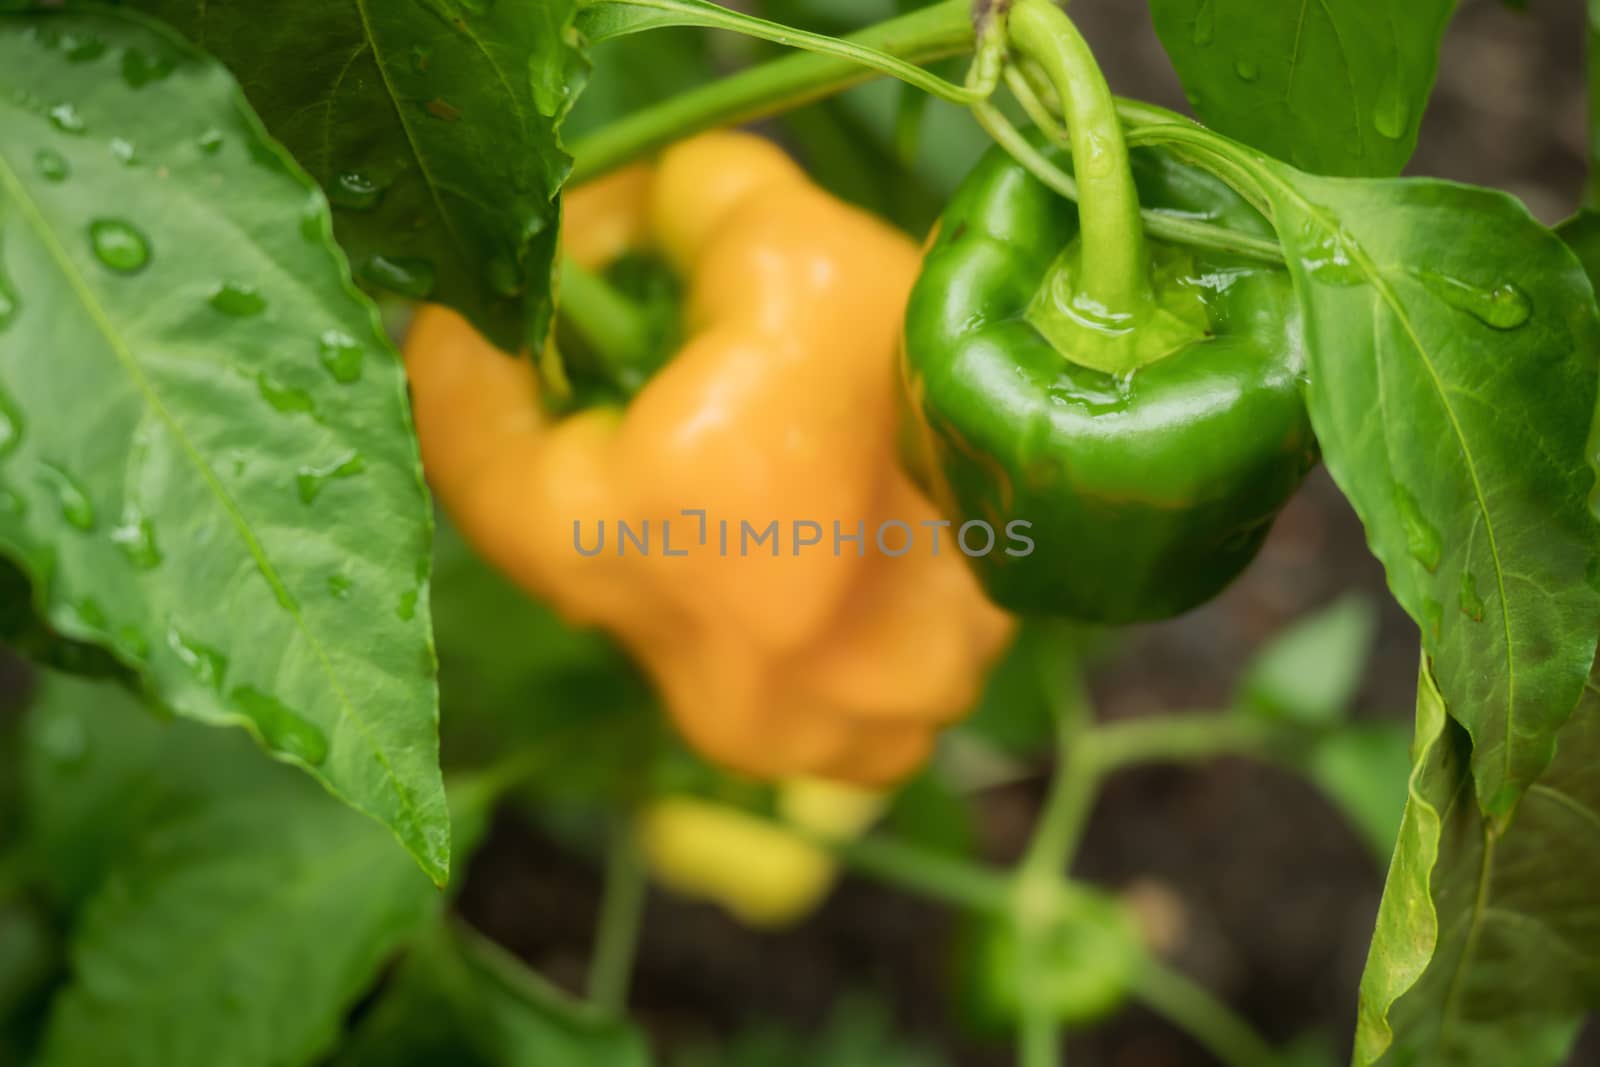 A green and a yellow pepper by sandra_fotodesign